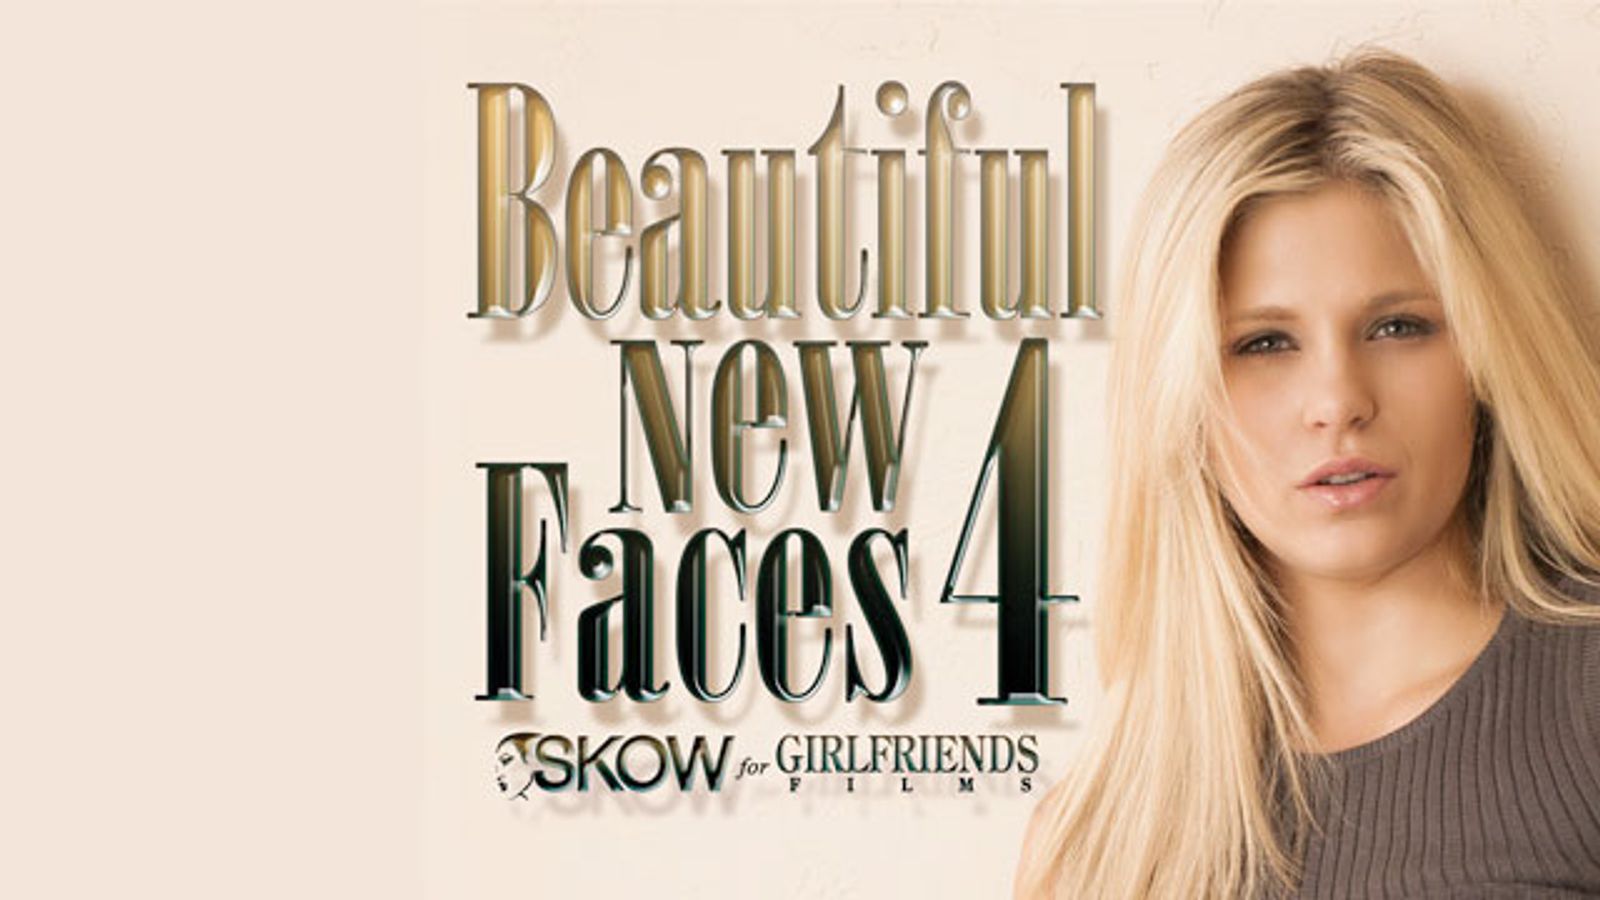 Skow for Girlfriends Releases 'Beautiful New Faces 4'